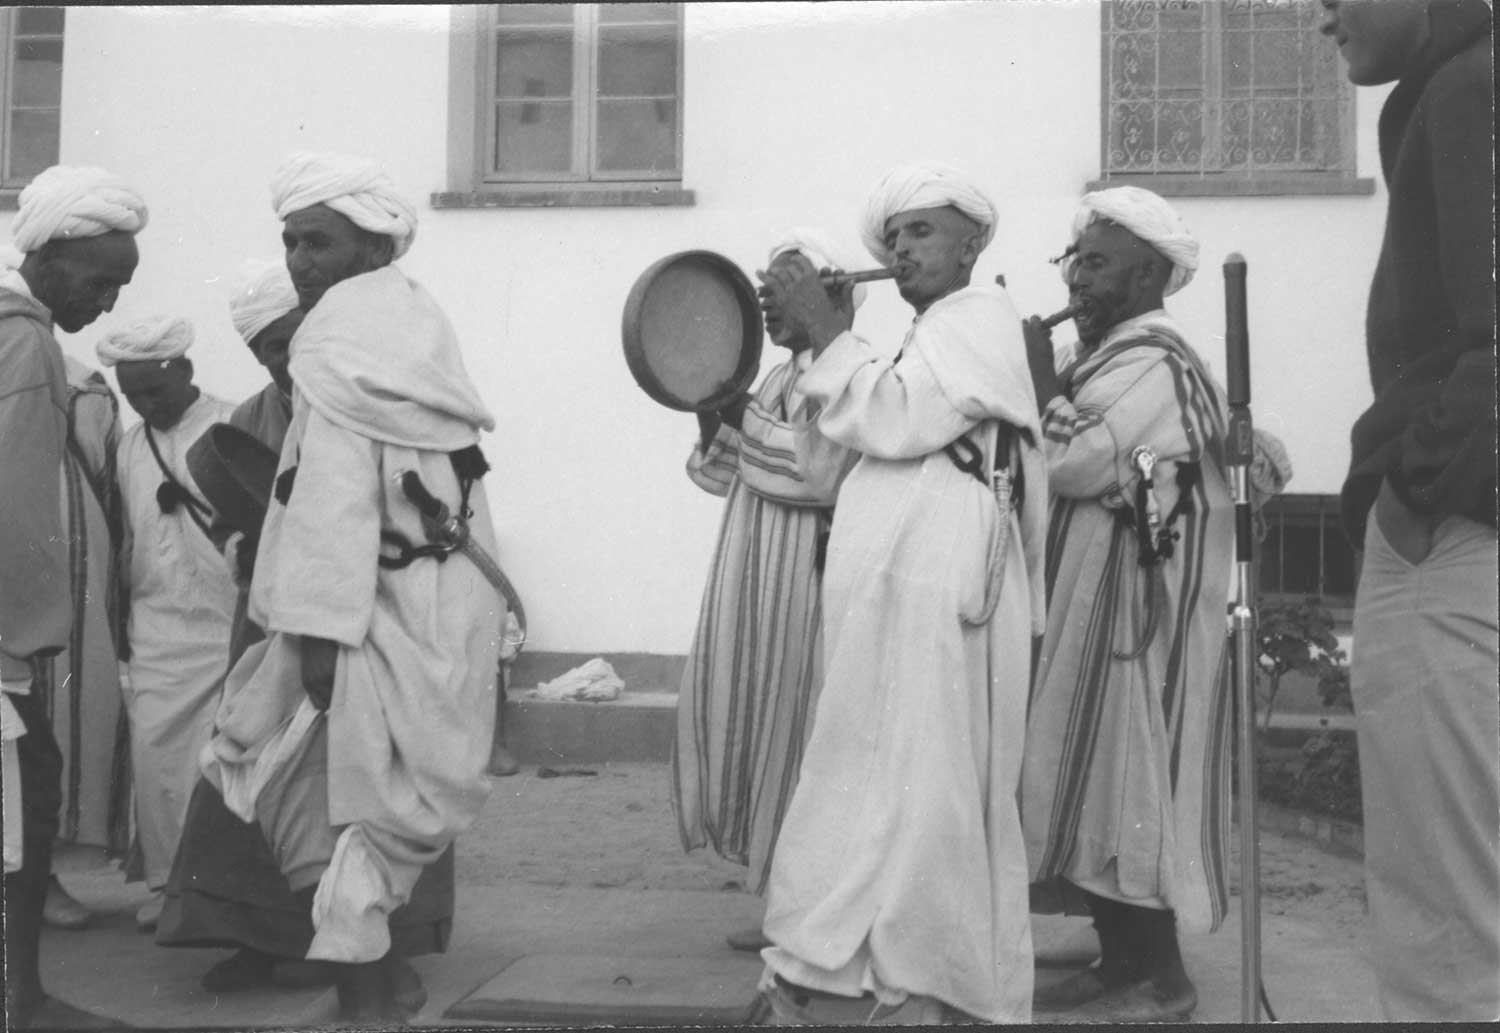 Rais Mahamad ben Mohammed and Ensemble, from the town of Tamanar, perform in Essaouira, Morocco